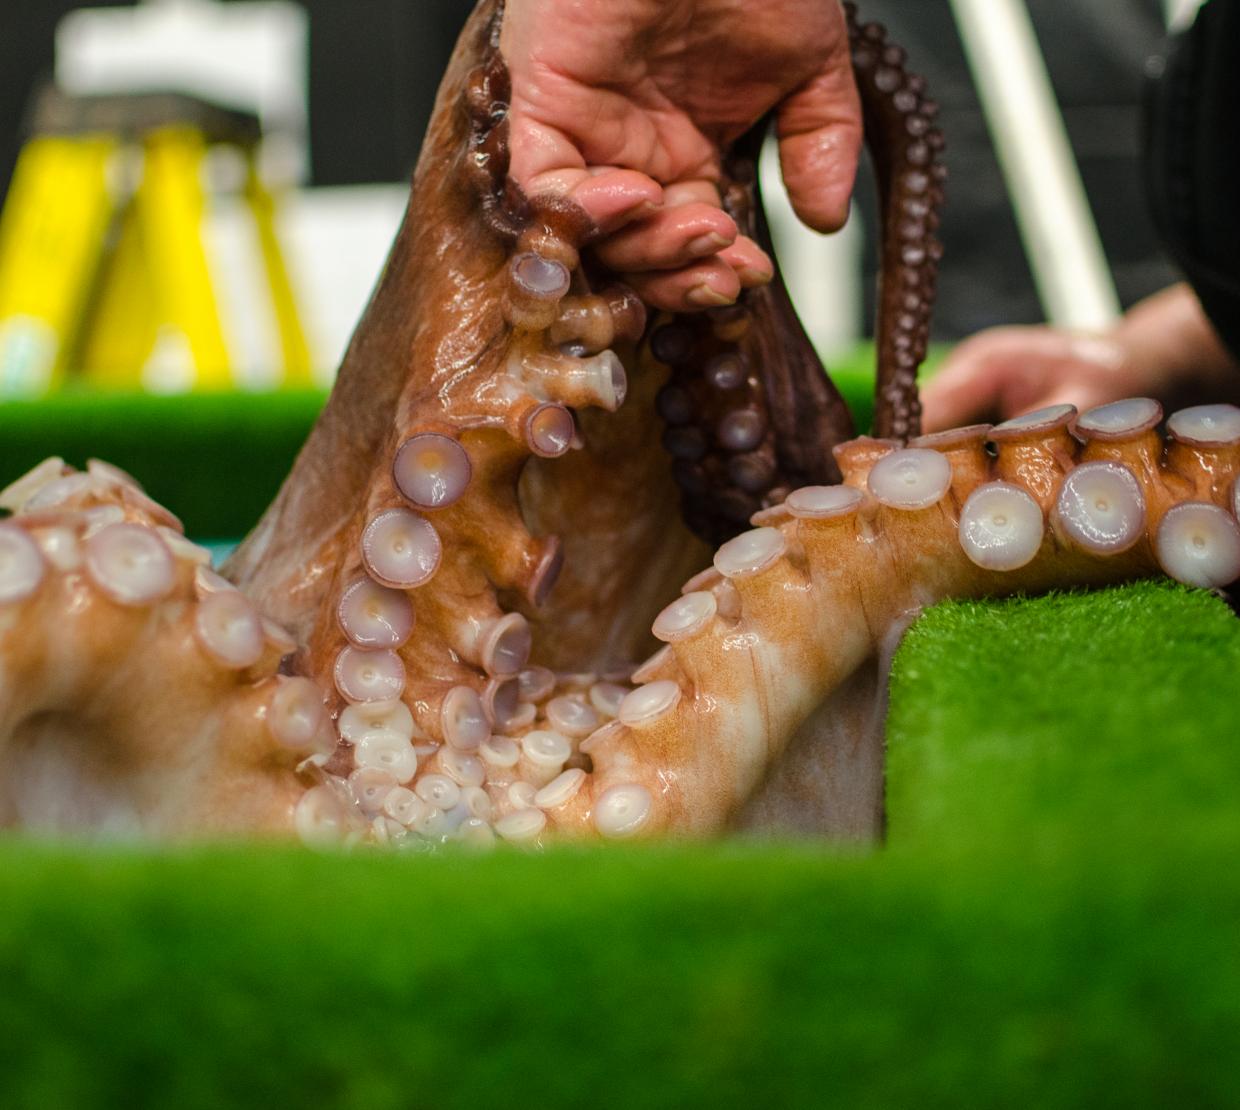 An octopus clings to an aquarist's hands with its suckers